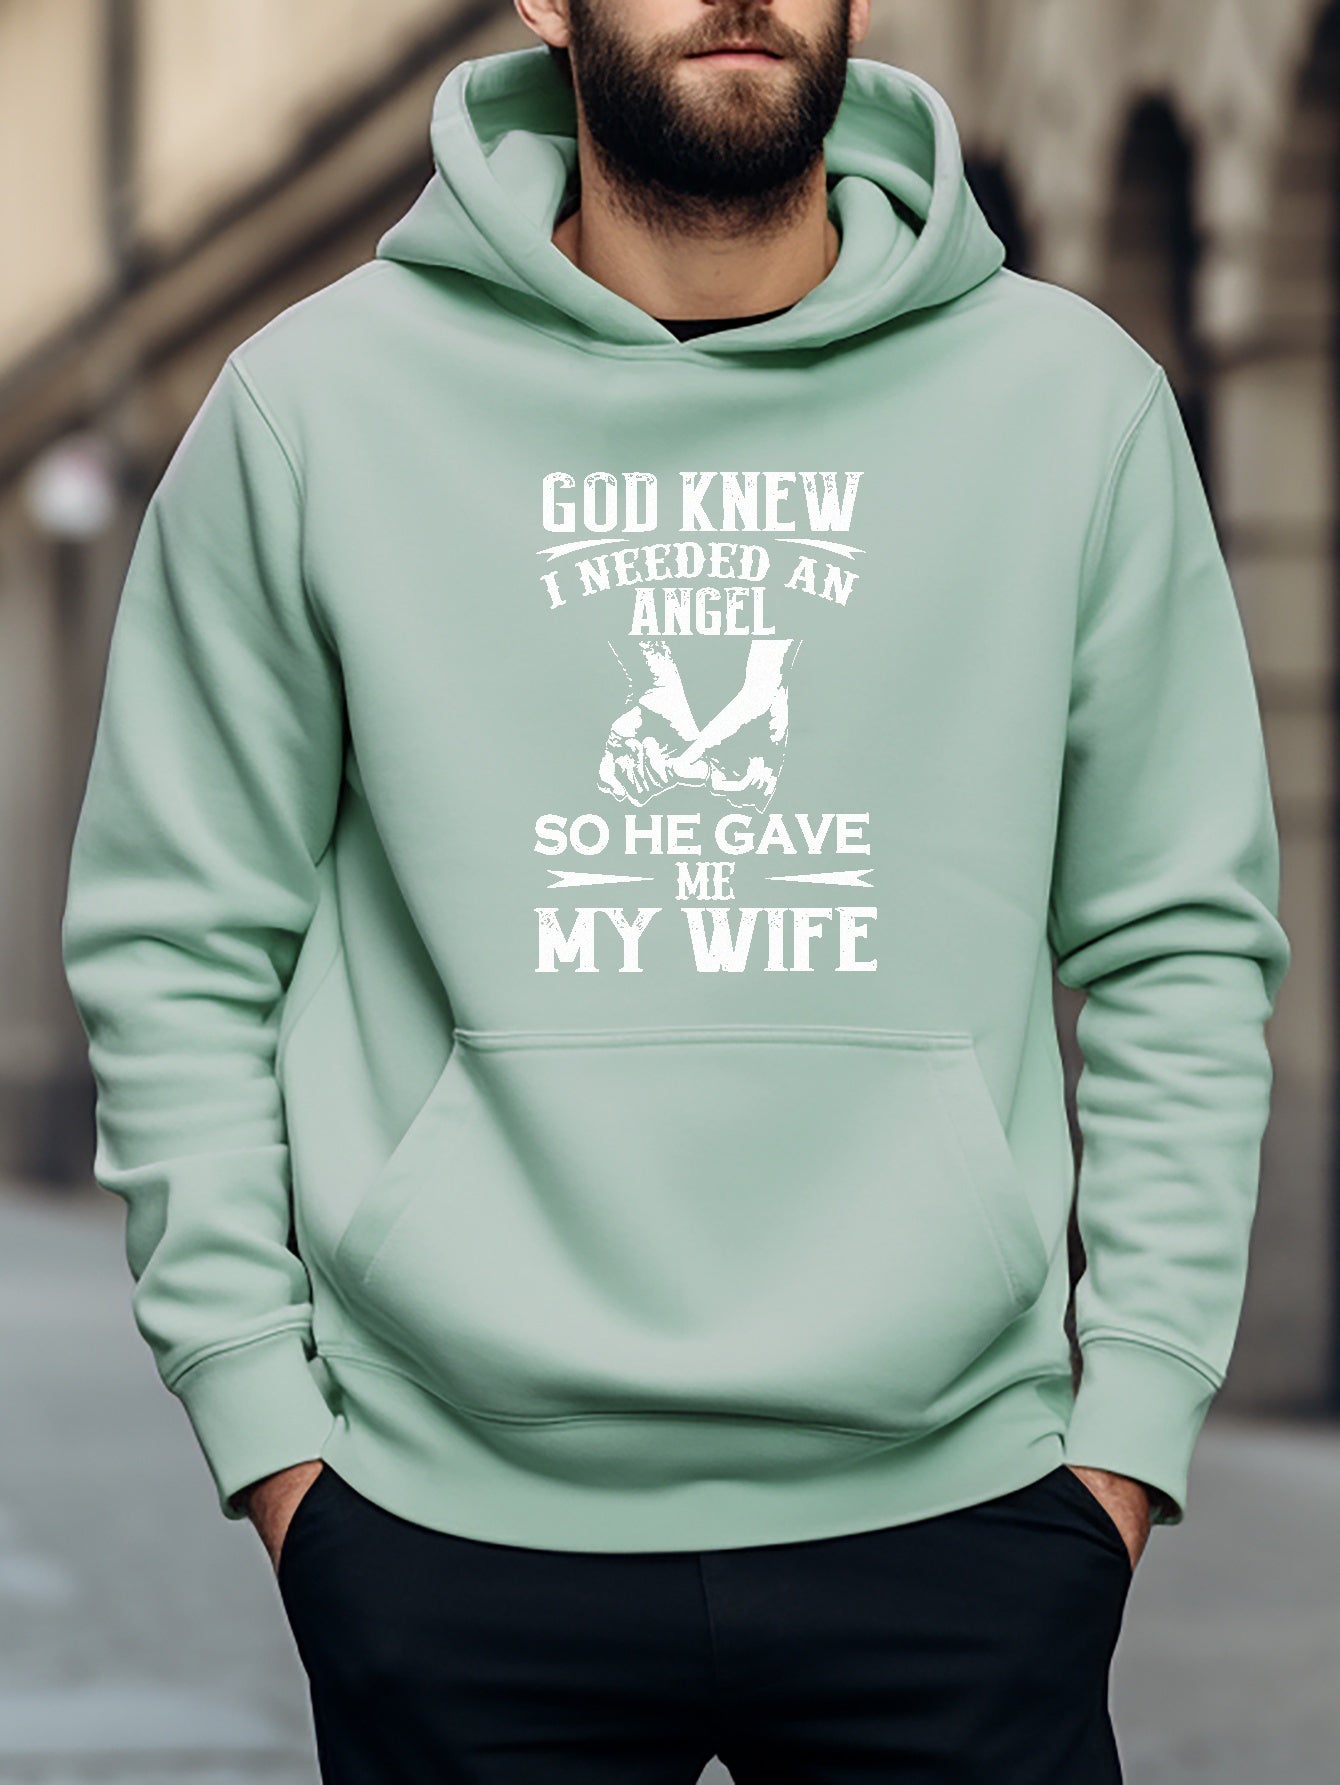 GOD KNEW I NEEDED AN ANGEL SO HE GAVE ME MY WIFE MEN'S CHRISTIAN PULLOVER HOODED SWEATSHIRT claimedbygoddesigns